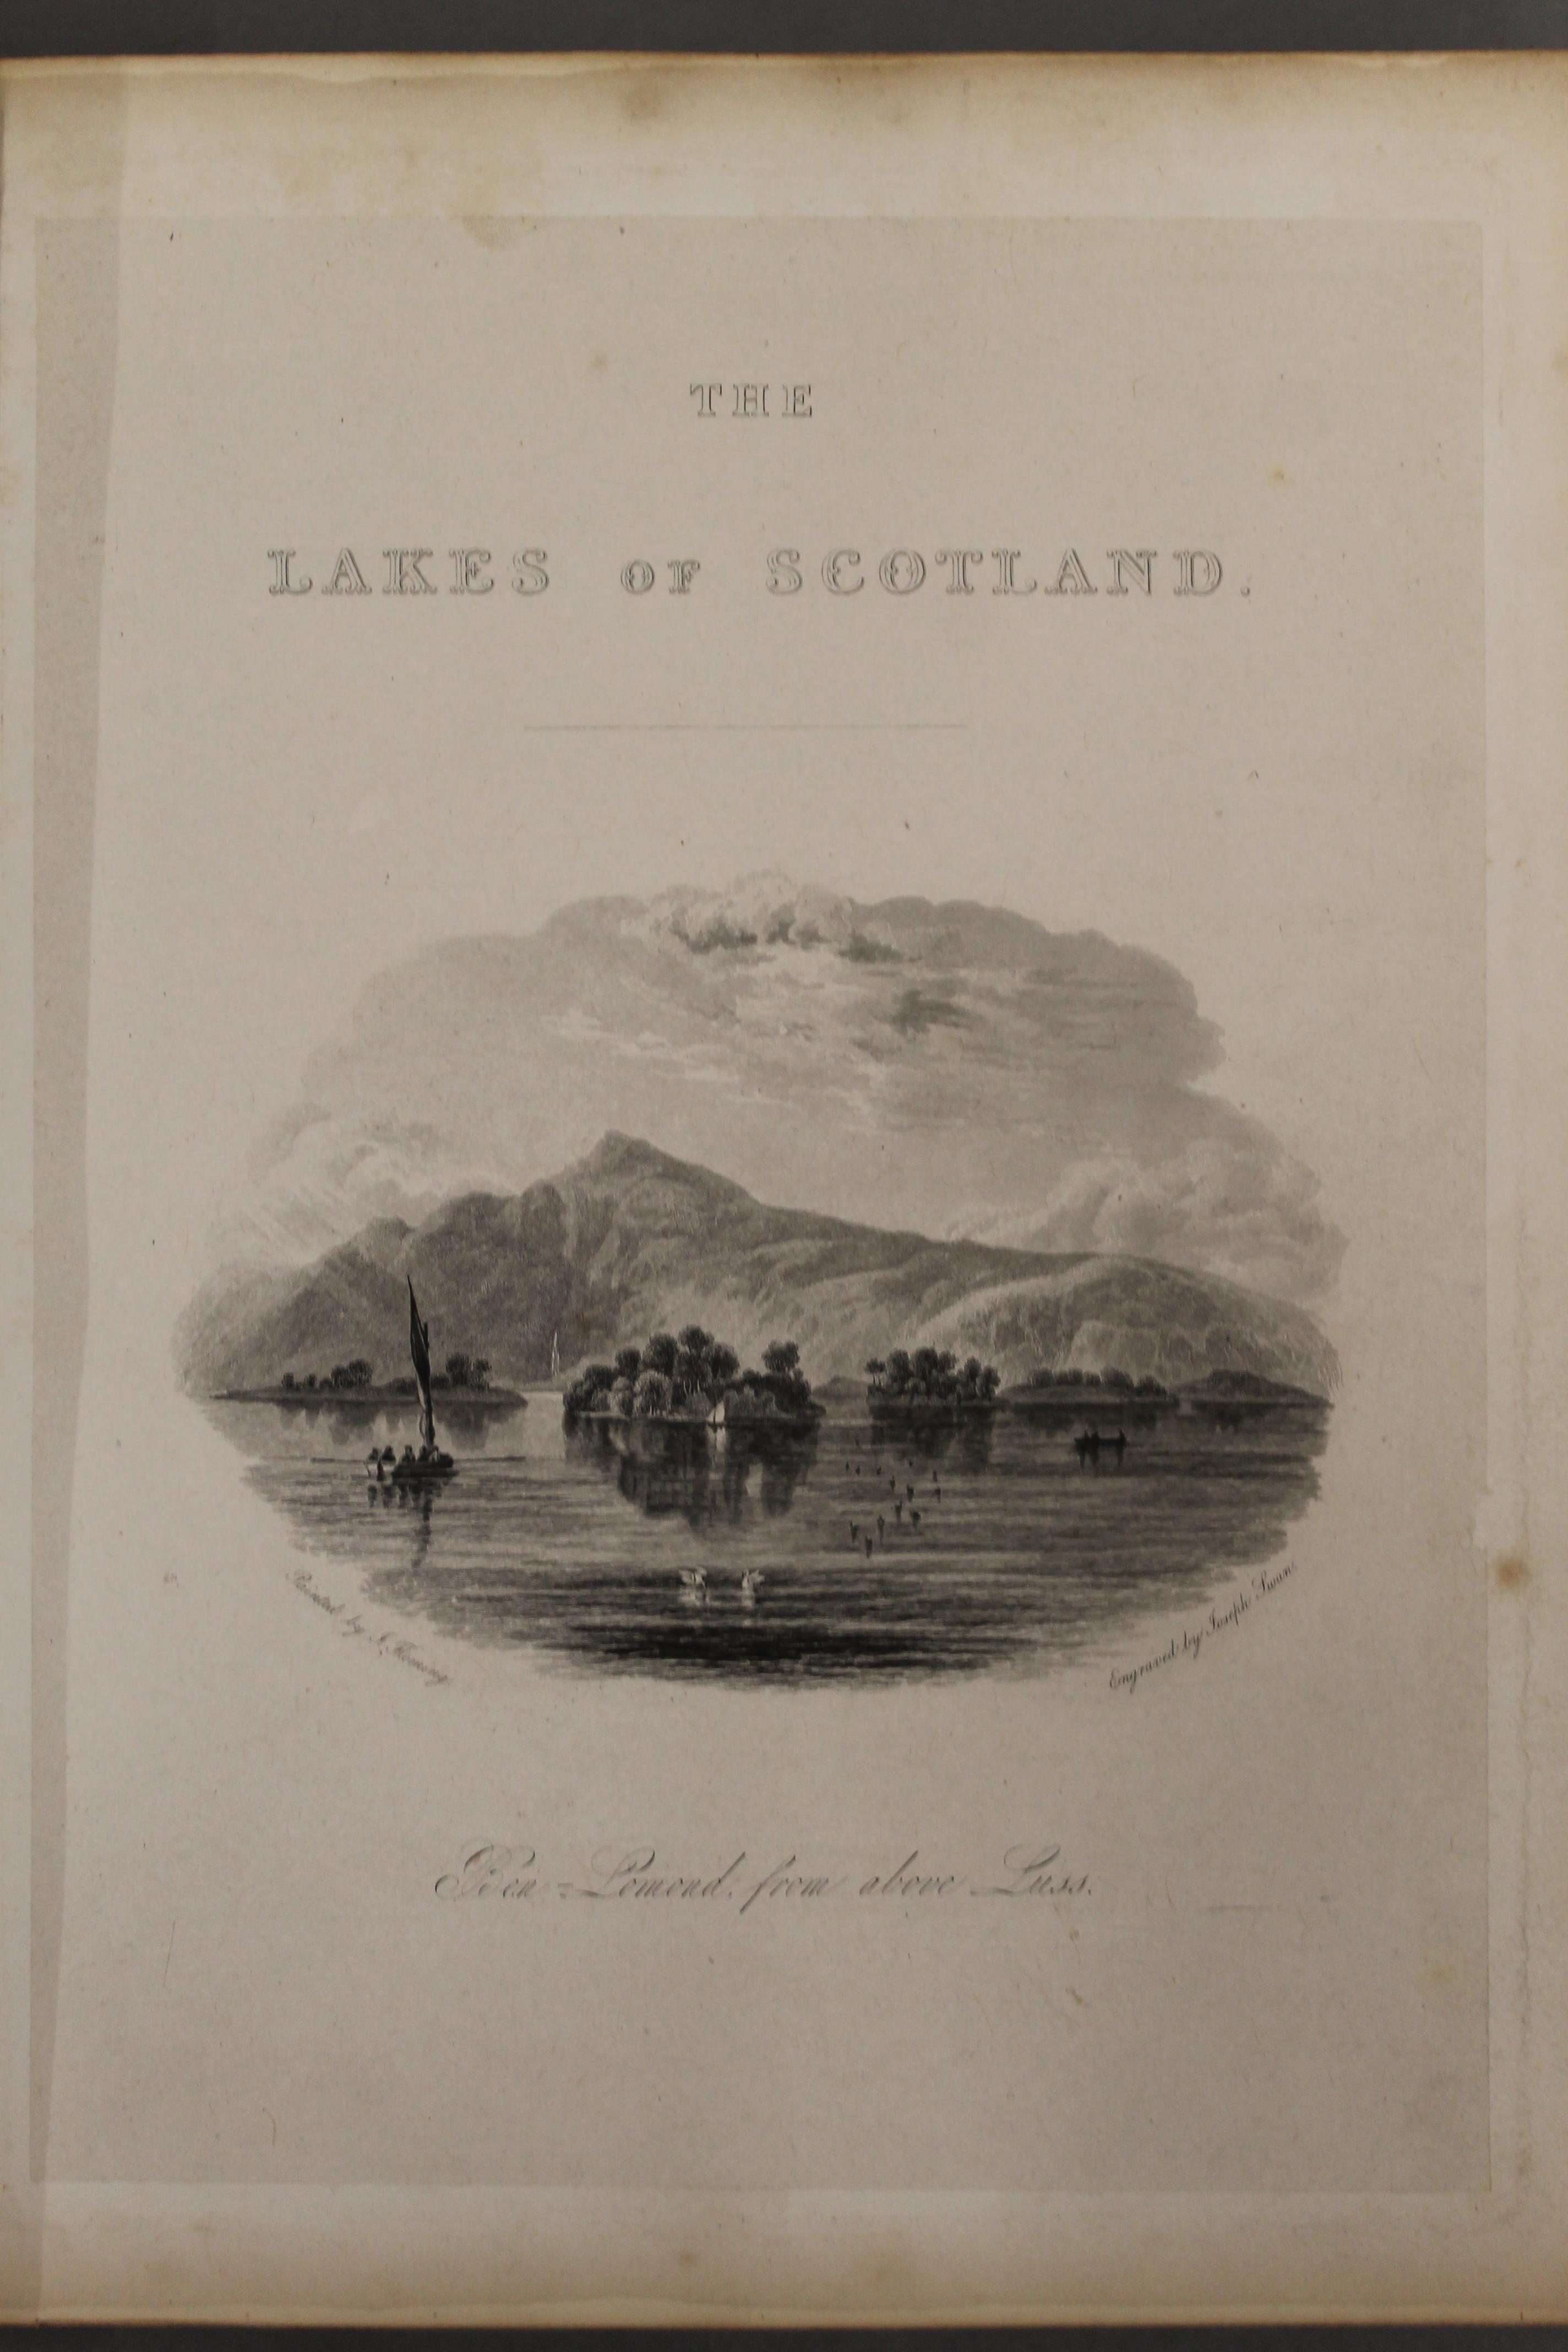 Swan Joseph, The Lakes of Scotland, a Series of Views, 1834, with 52 engraved views, - Image 2 of 3